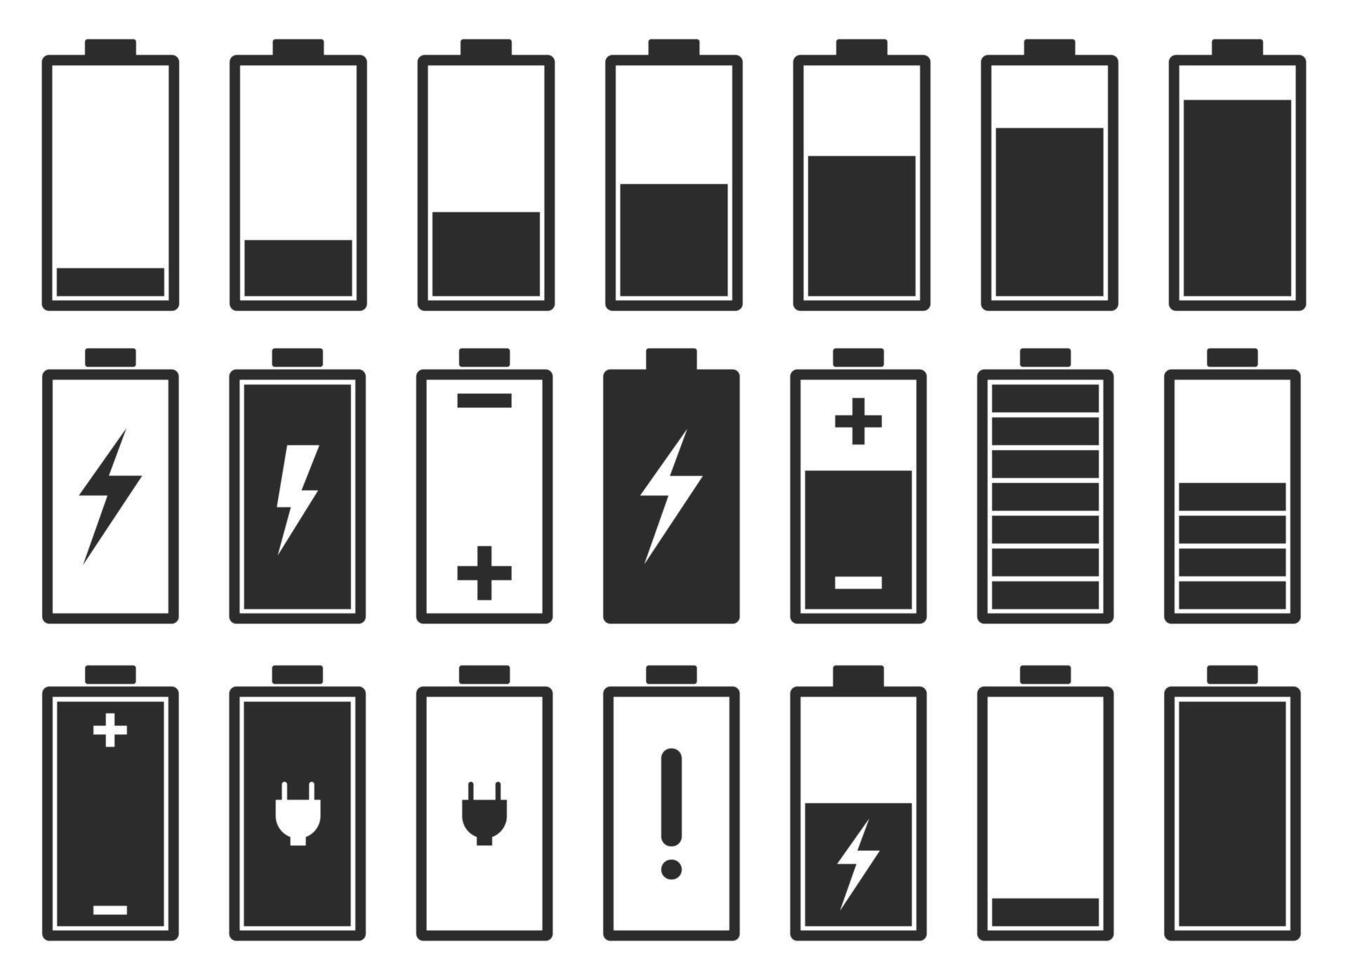 Battery flat icon vector design illustration isolated on white background